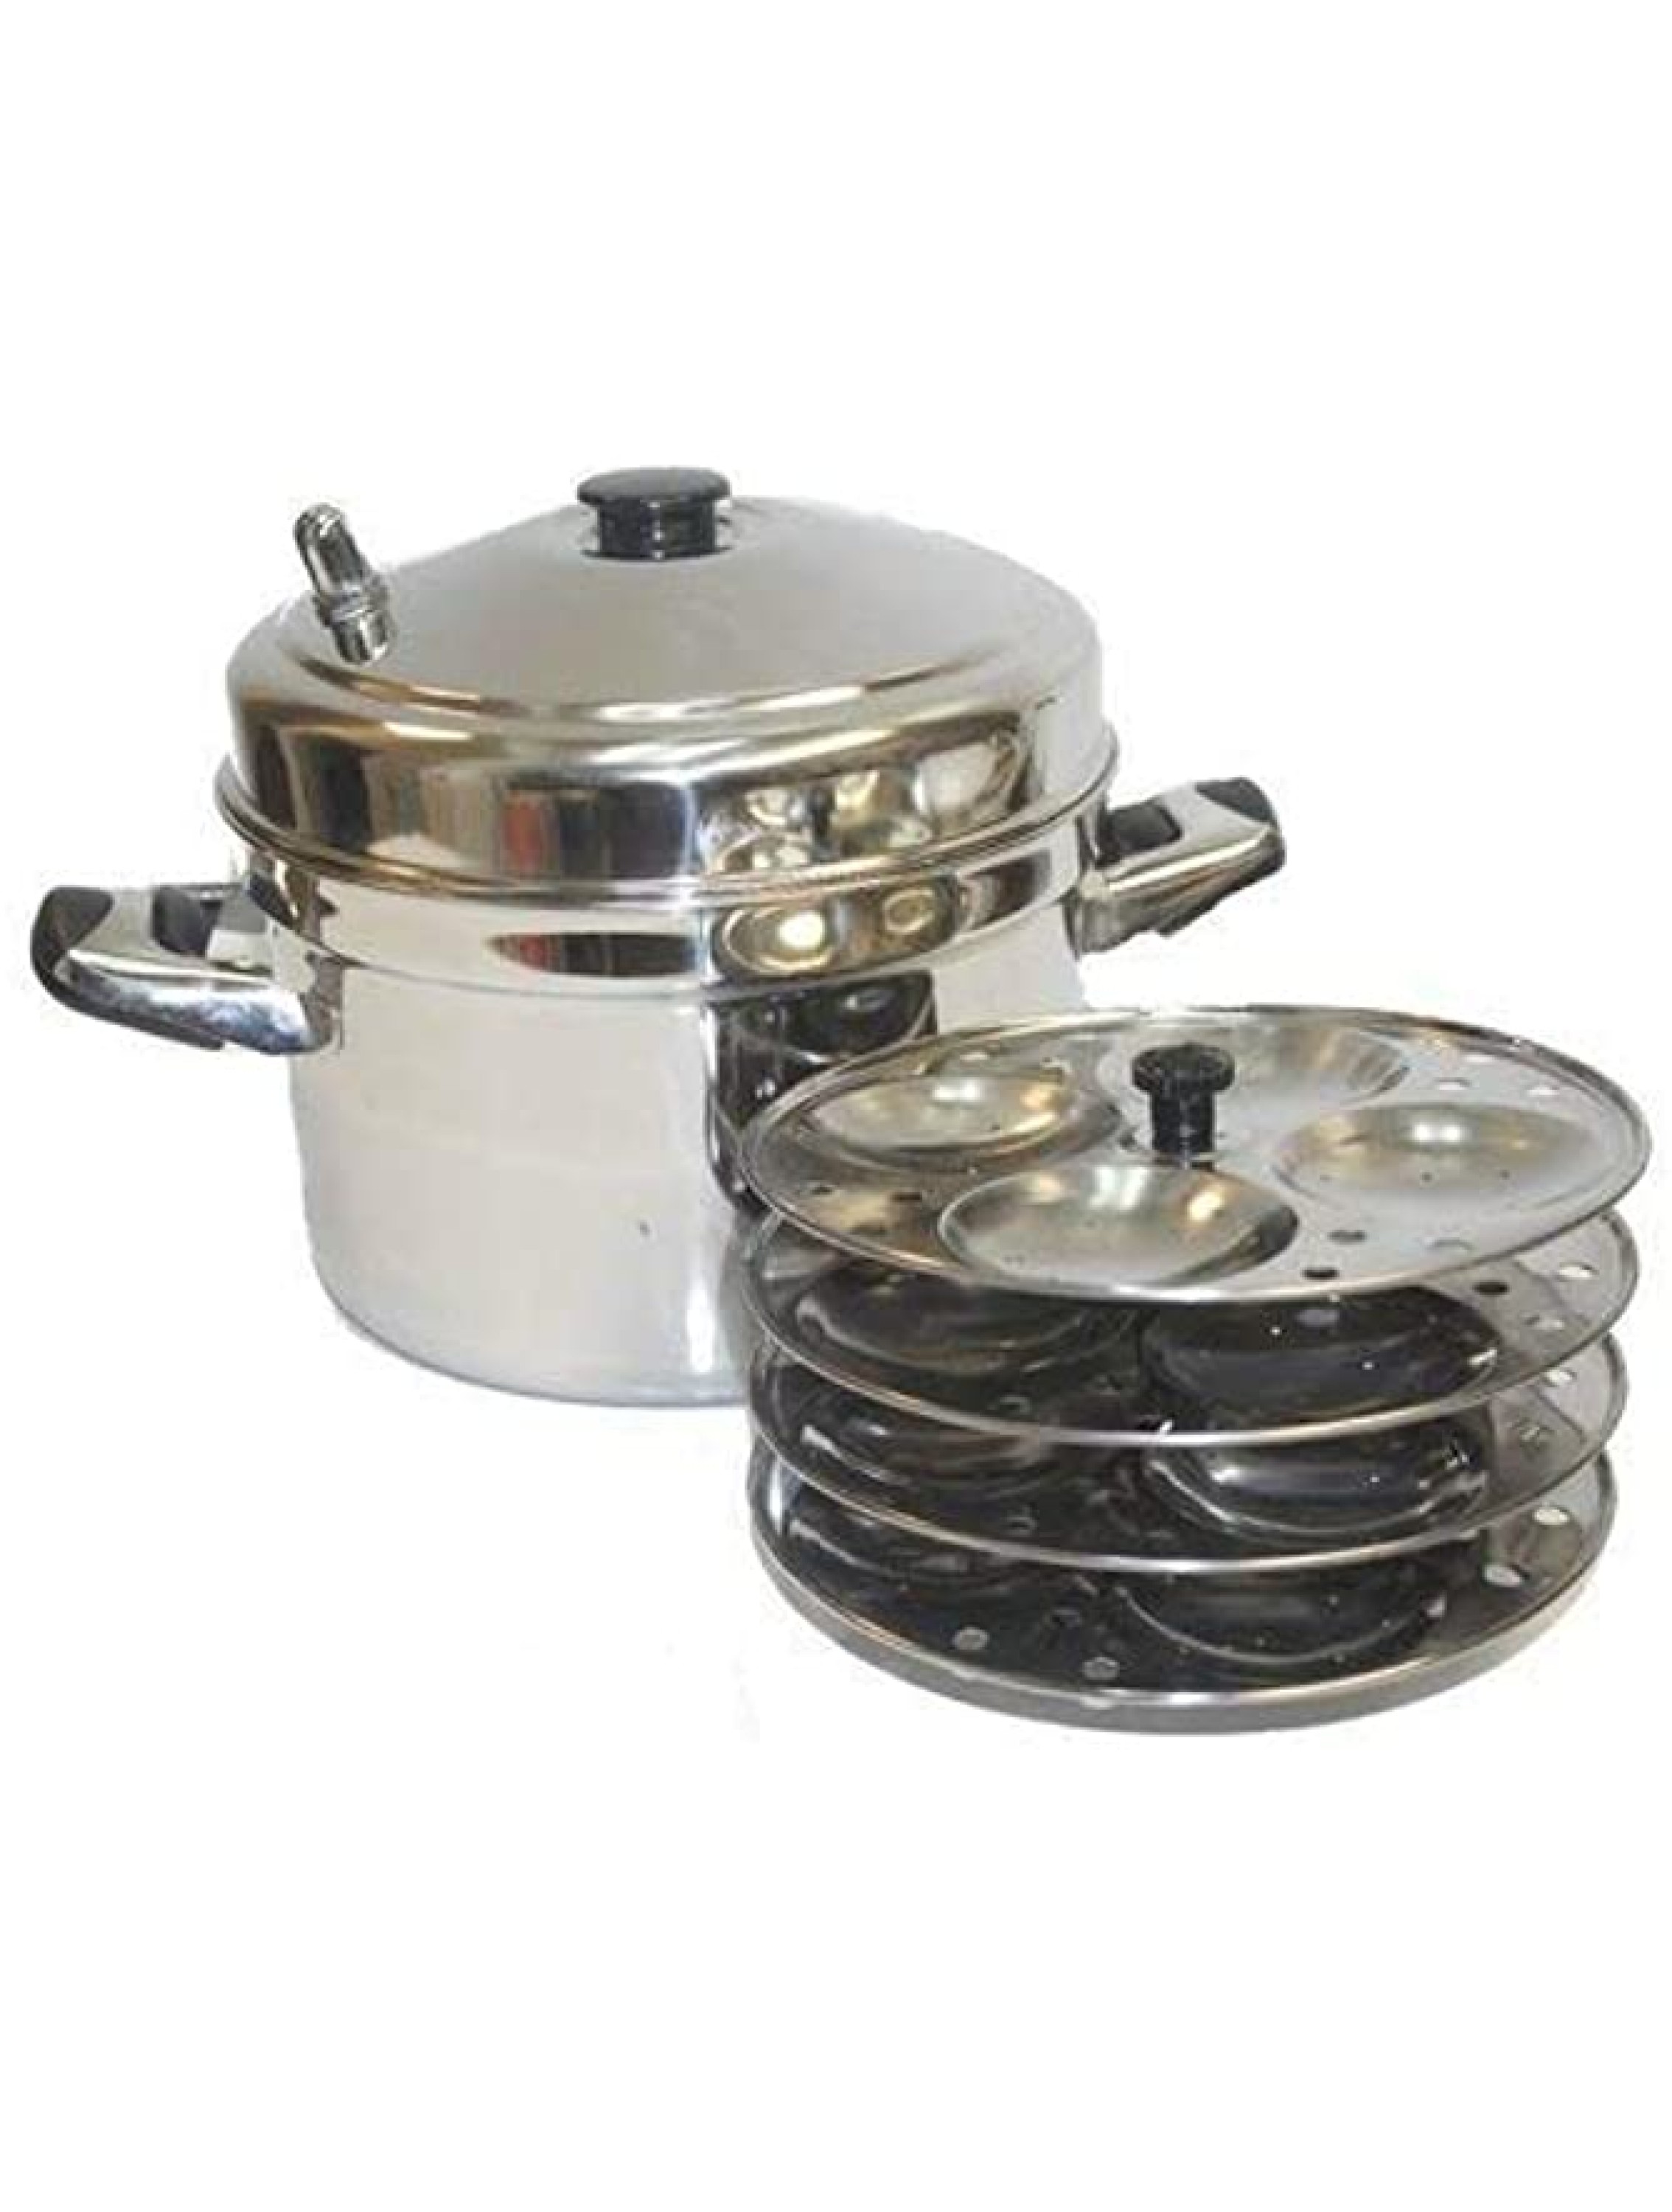 TABAKH IC-205 5-Rack Stainless Steel Idli Cooker with Strong Handles,Silver,Medium - B5V5JU6DH